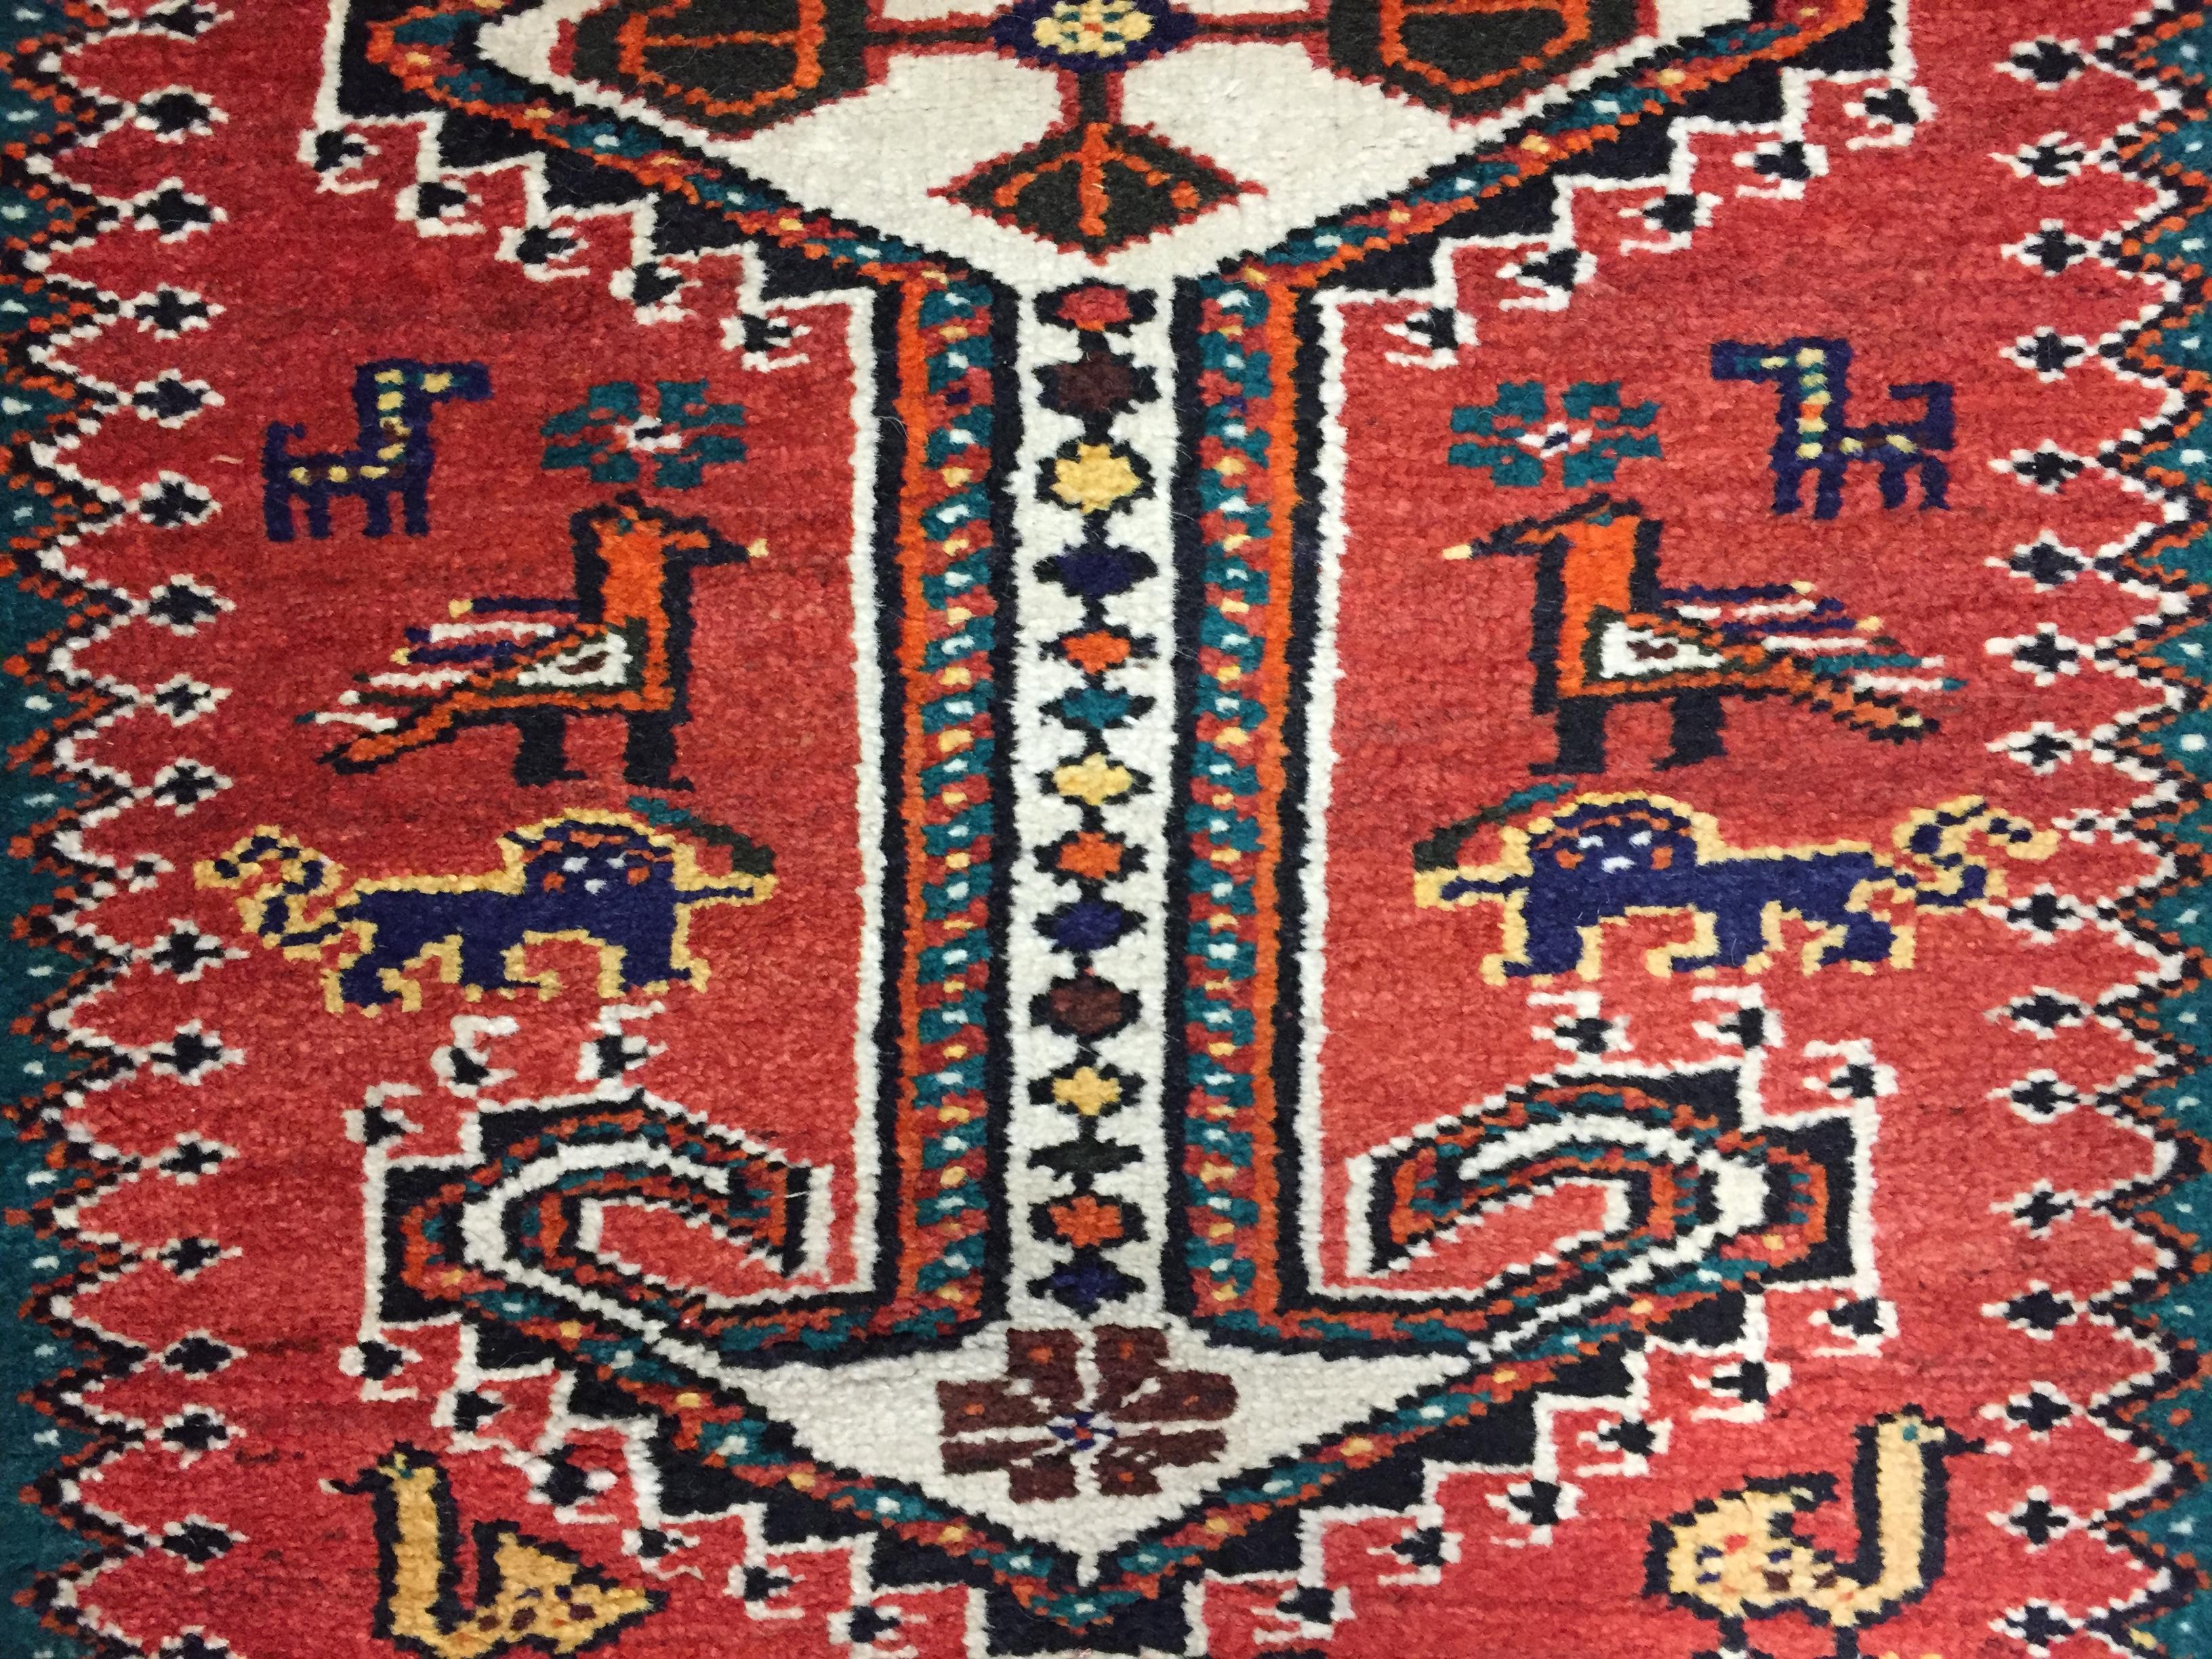 Wool Vintage Qashgai Pictorial Runner  3'3 x 12'2 For Sale